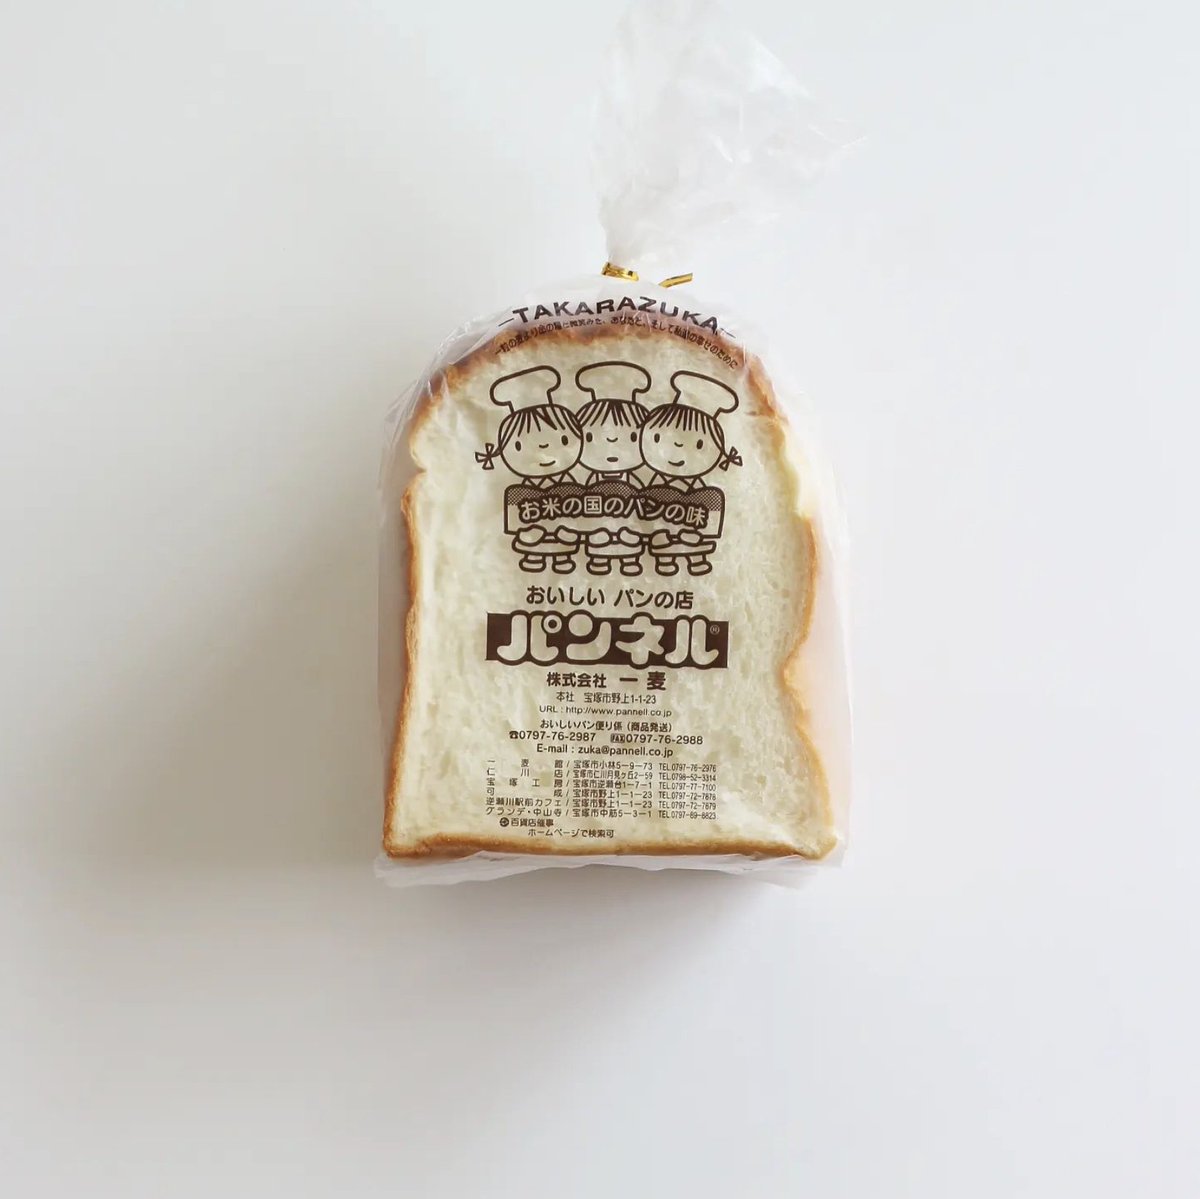 Japanese bread packaging design is a whole different kinda beautiful. #packaging #designarchives